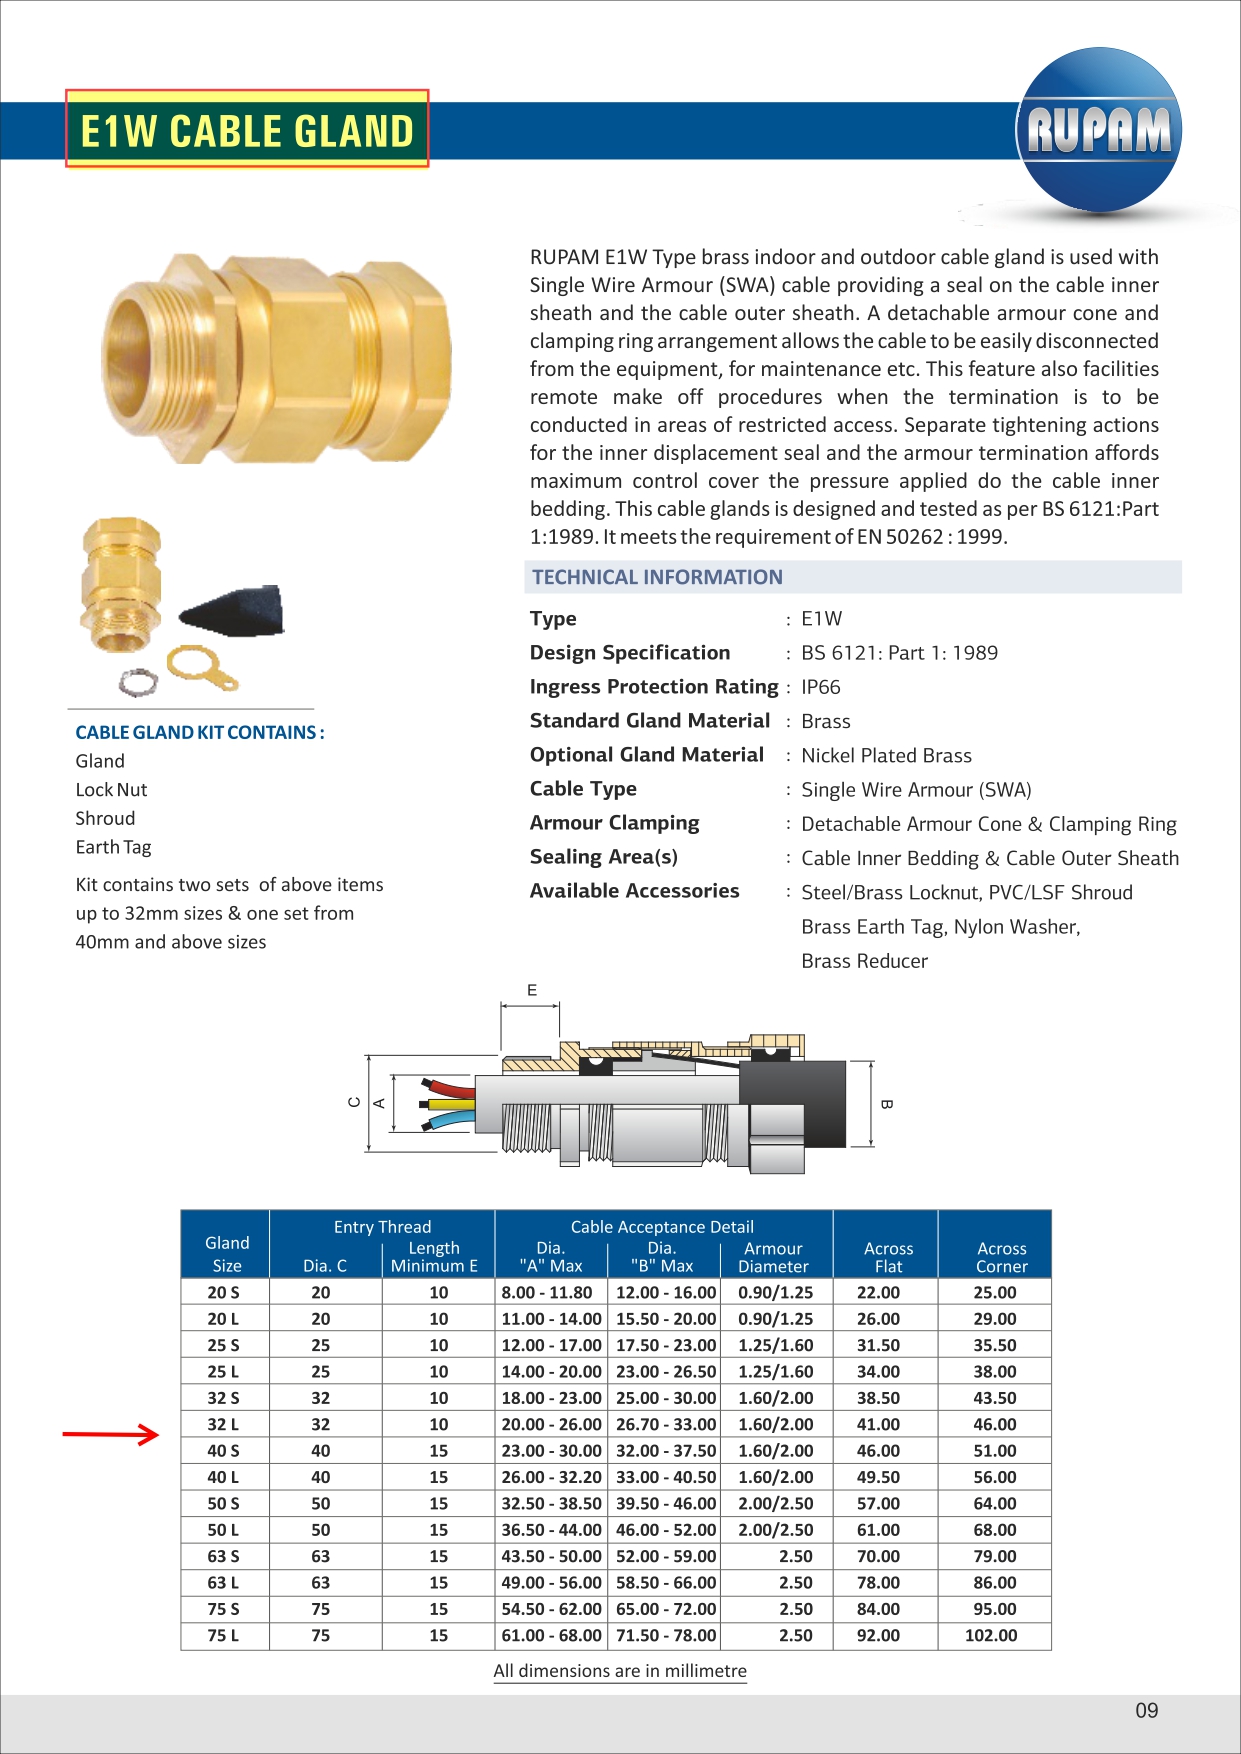 Rupam E1W Brass Cable Gland with LSF Shroud